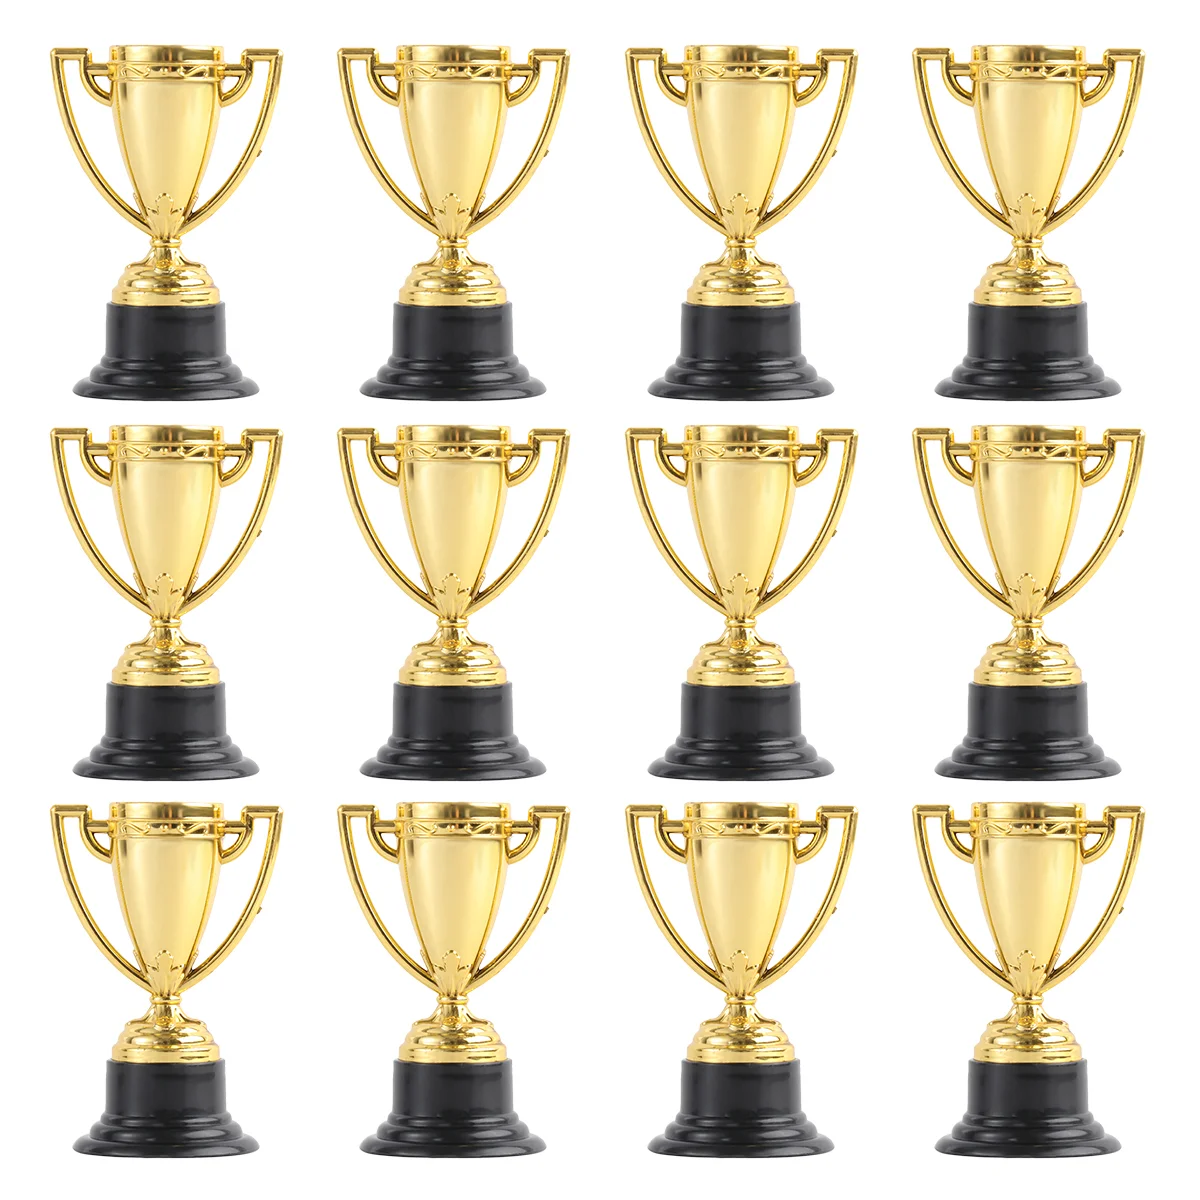 

Trophy Trophies Award Kids Mini Golden Cups Awards Party Cup Sports Gold Basketball Bulk Ceremony Winner Baseball Favors Place